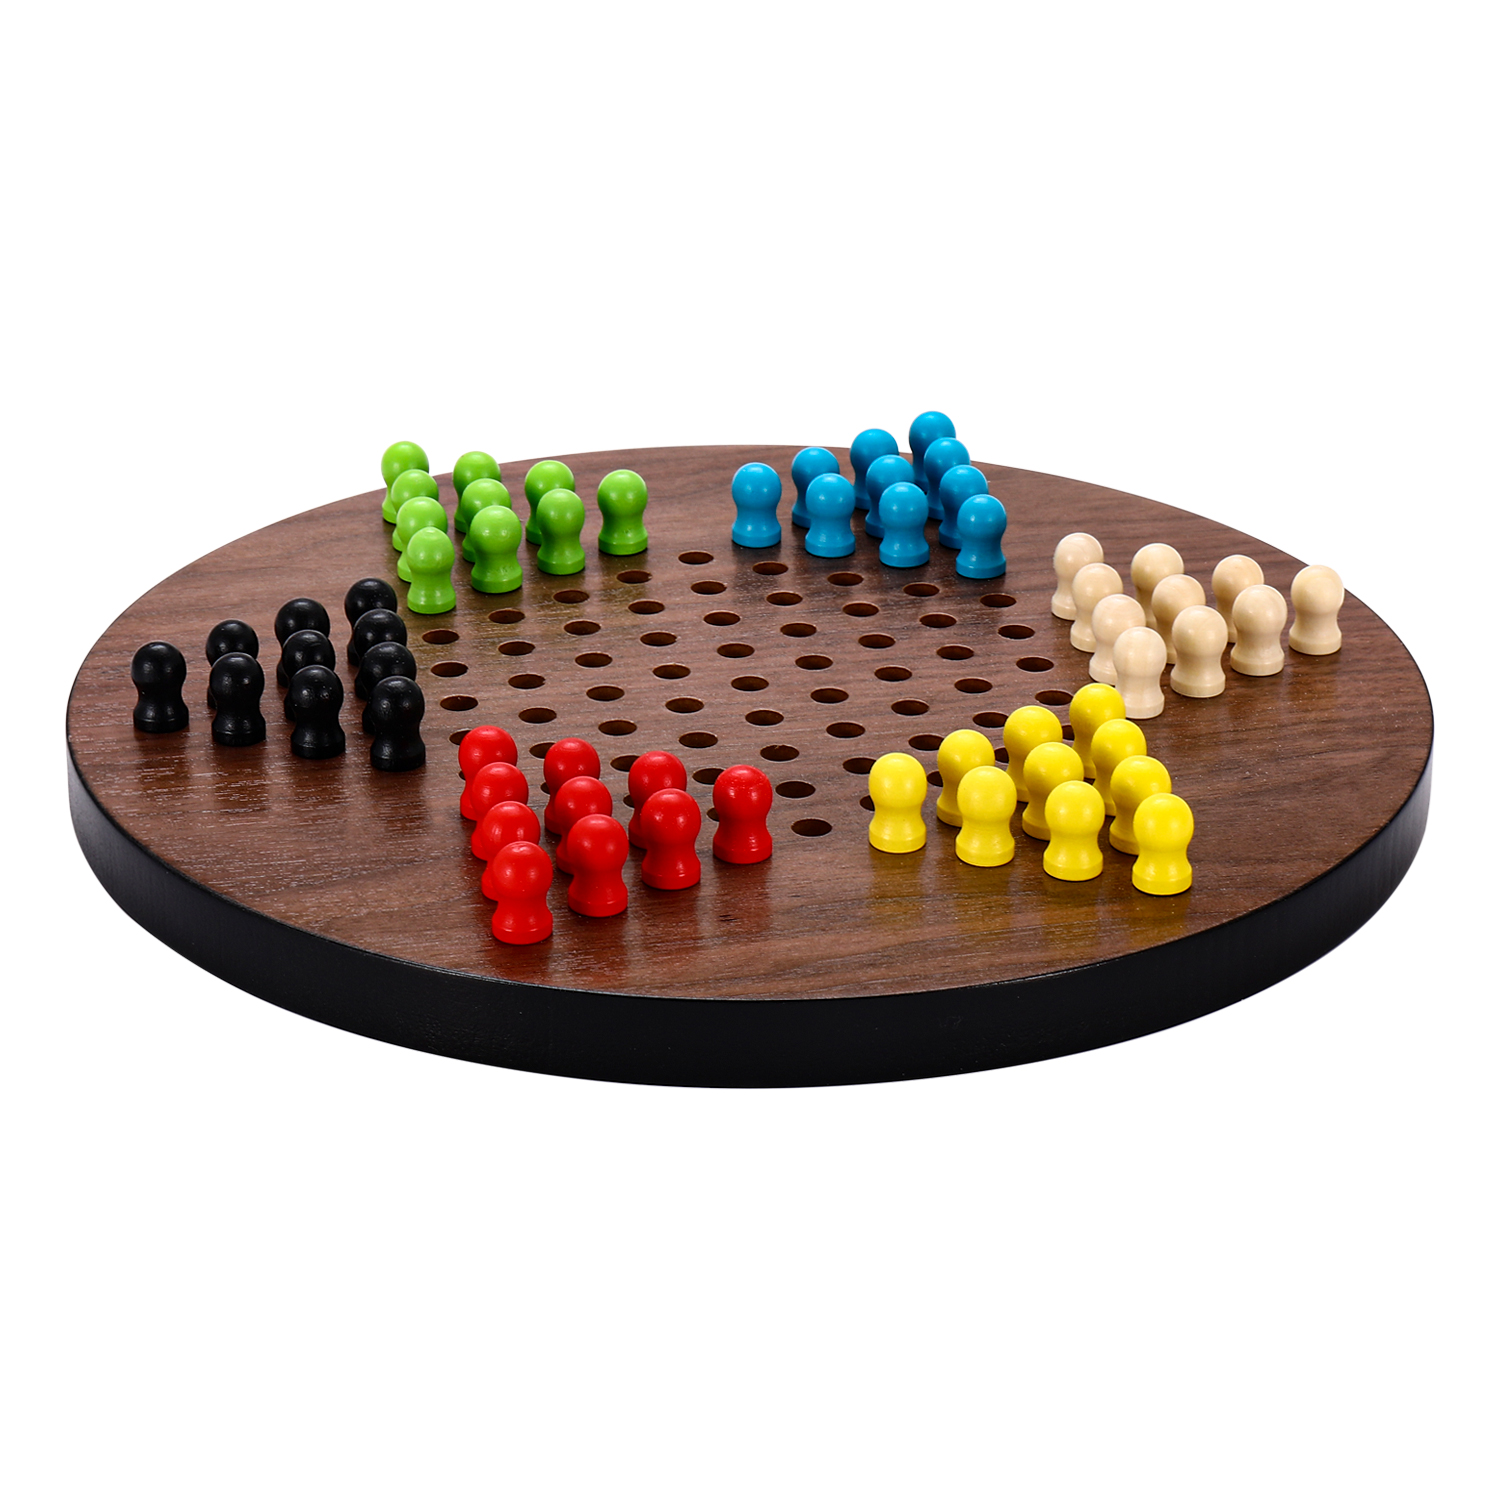 chinese checkers board game rules